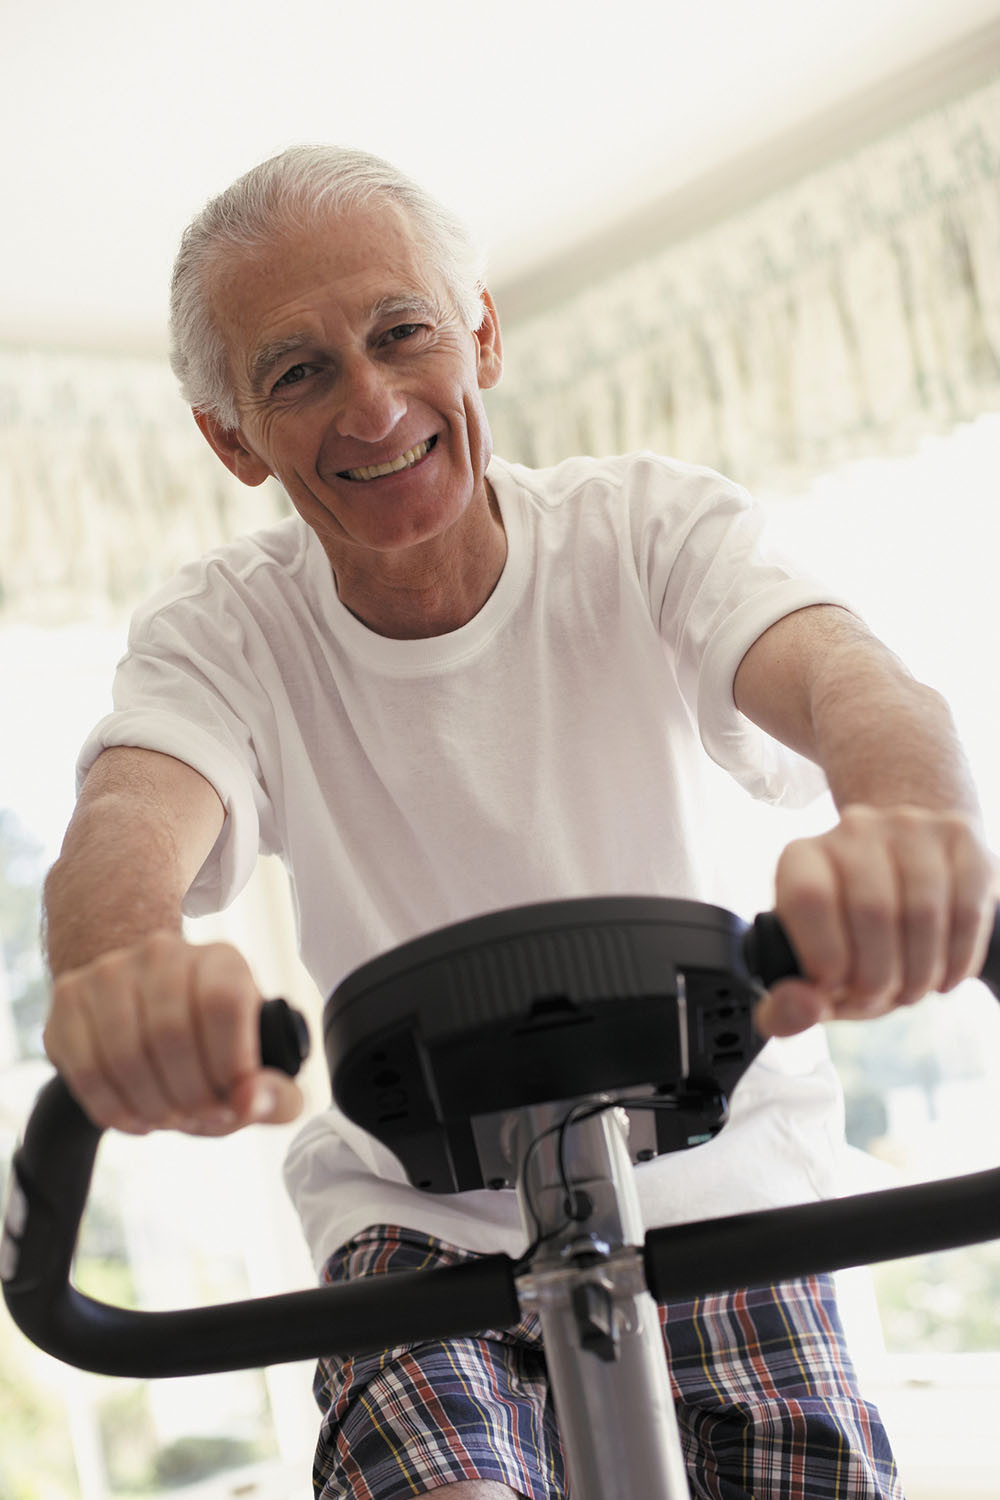 photo of a senior man exercising on a stationary bike in his home